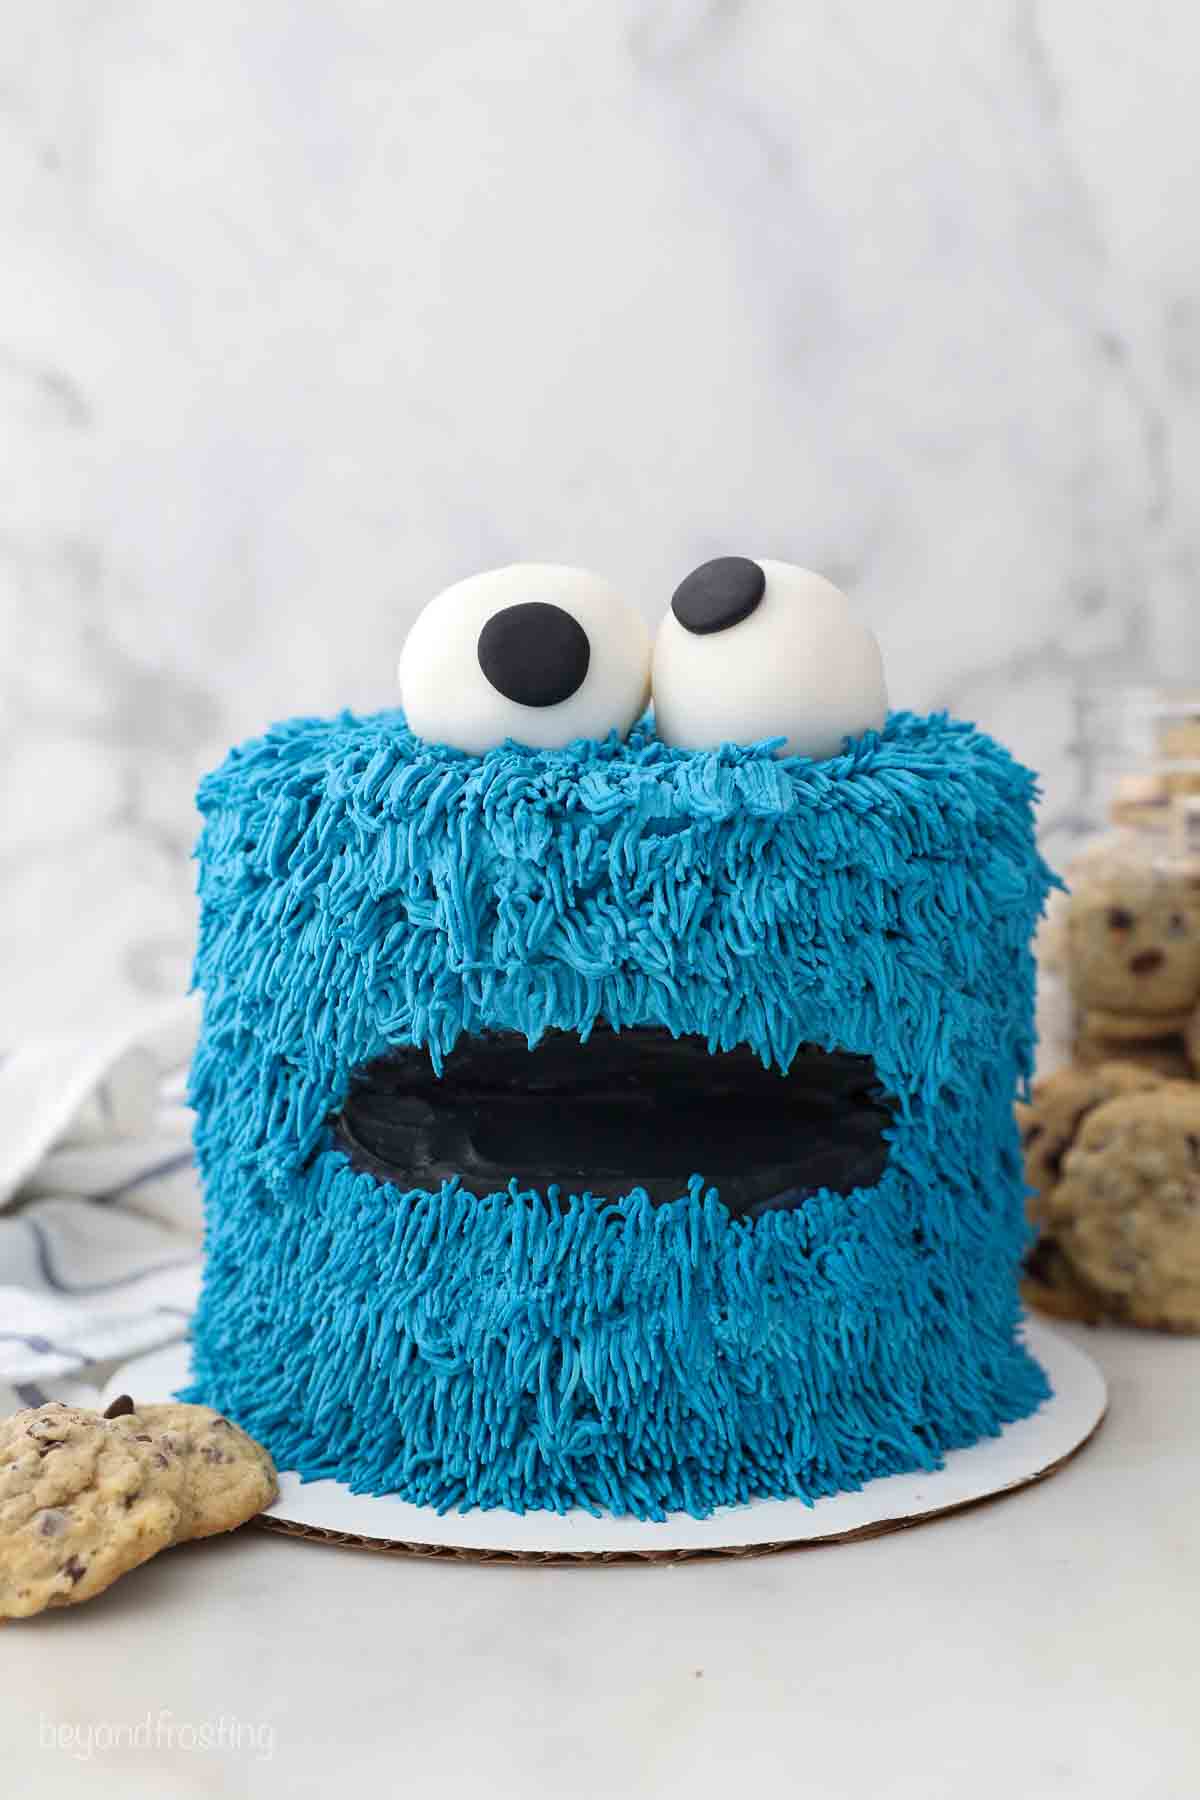 a cookie monster cake sitting on a marble surface with a jar of cookies in the background